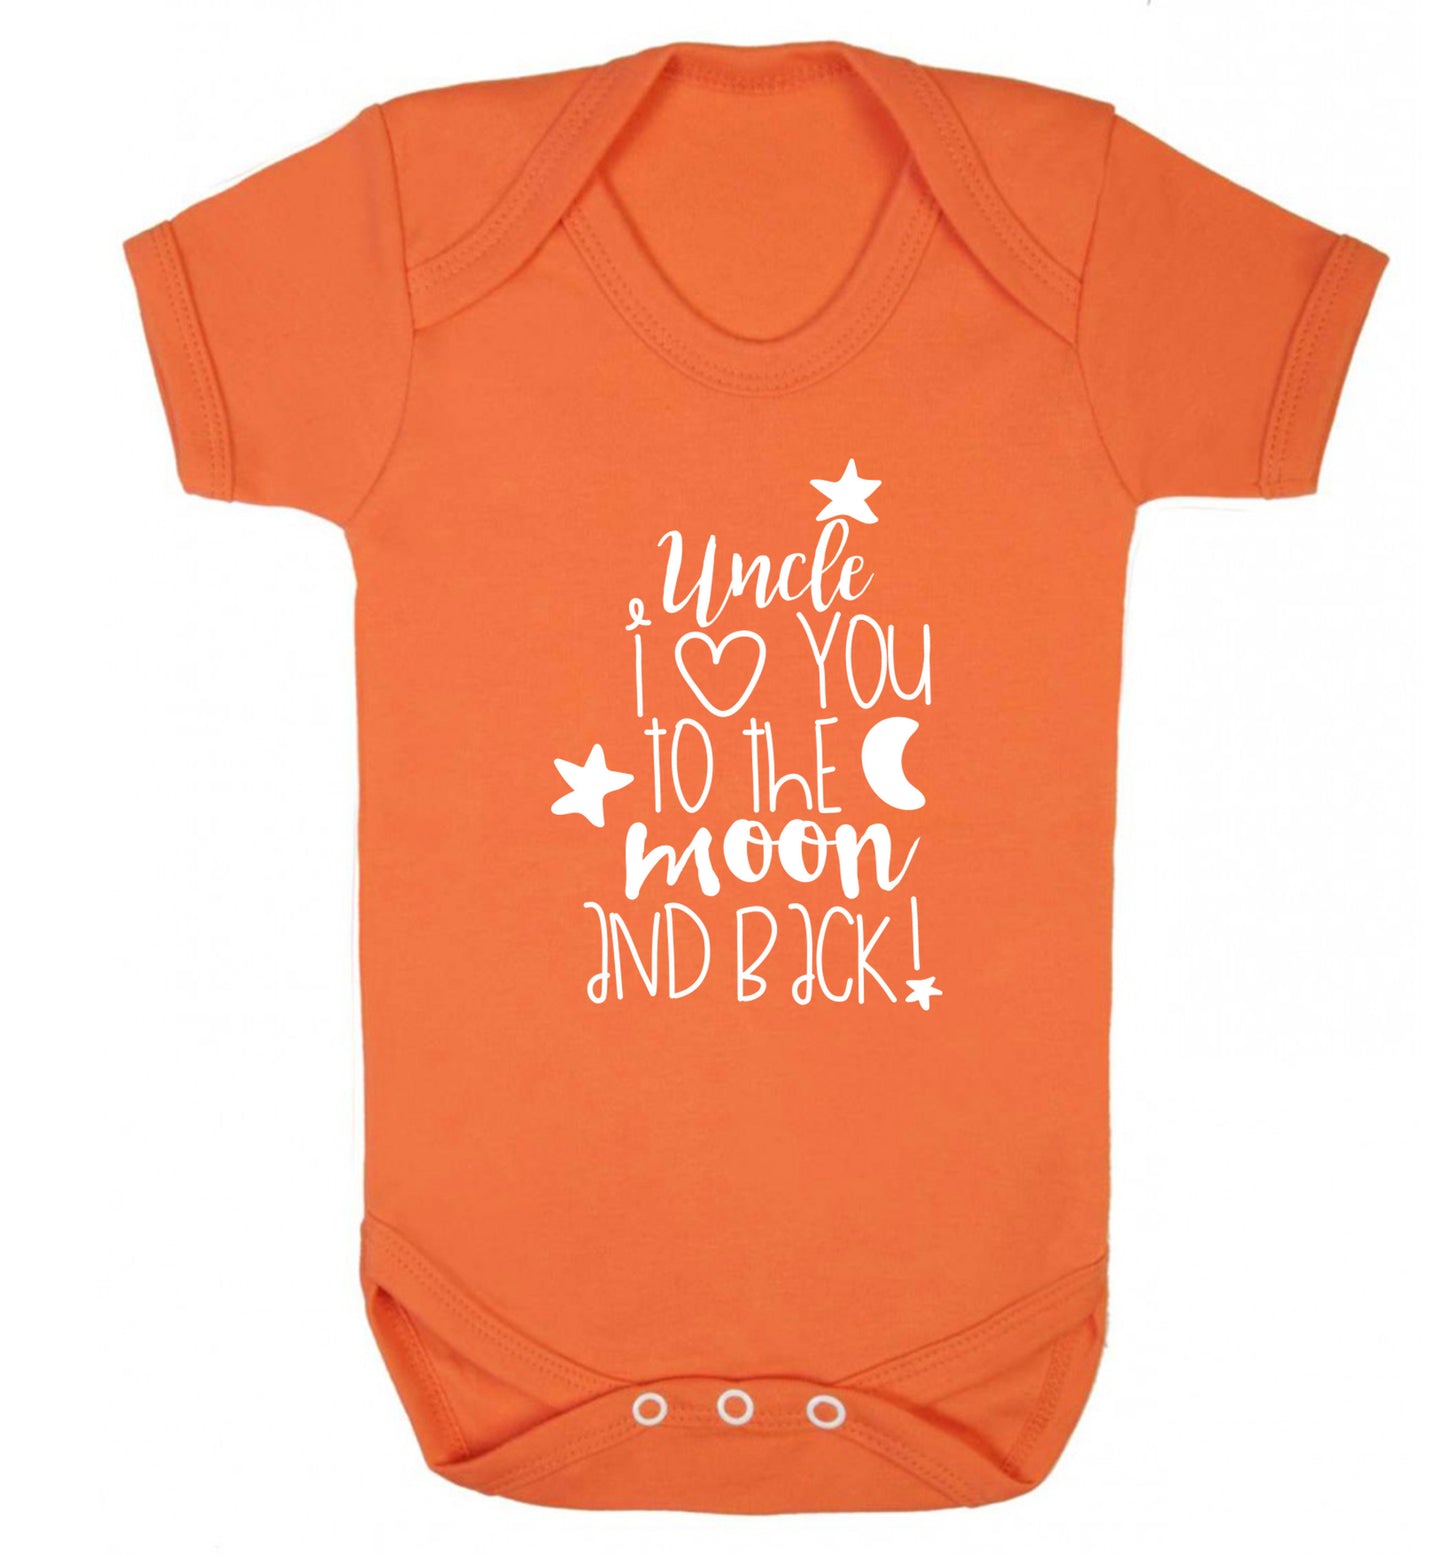 Uncle I love you to the moon and back Baby Vest orange 18-24 months